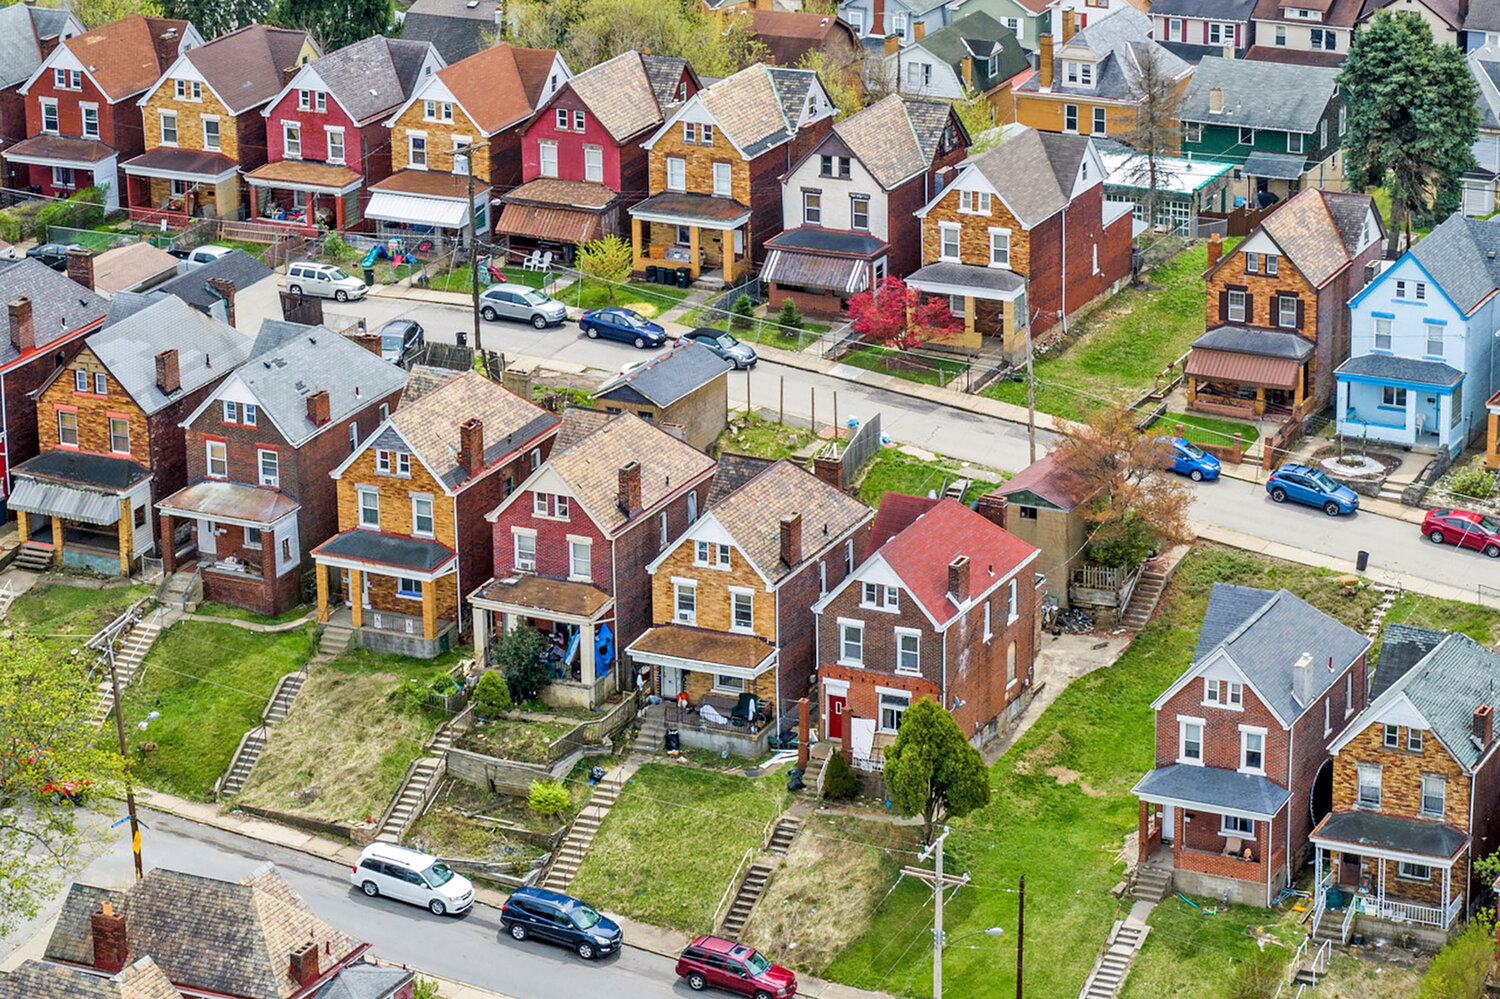 Houses in Knoxville, a neighborhood in Pittsburgh. Most older adults ages 50 to 80 say it’s important to stay in their homes for as long as they can, according to the 2022 National Poll on Healthy Aging from the University of Michigan.